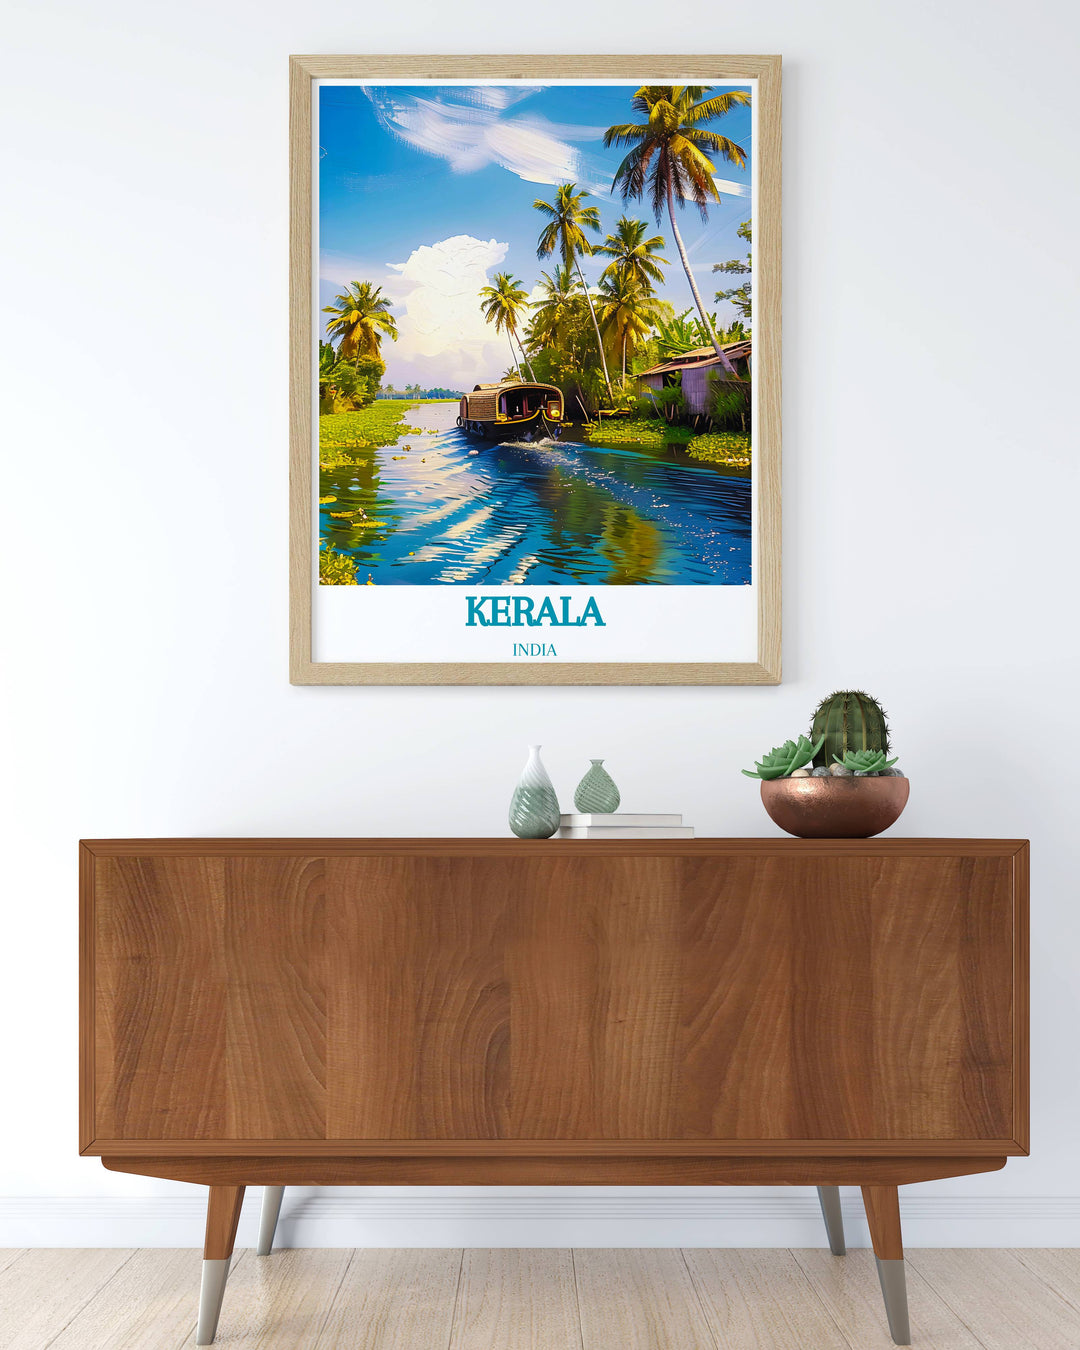 Vintage travel print of Kerala India highlighting the cultural and natural beauty of the region suitable for collectors and travel buffs